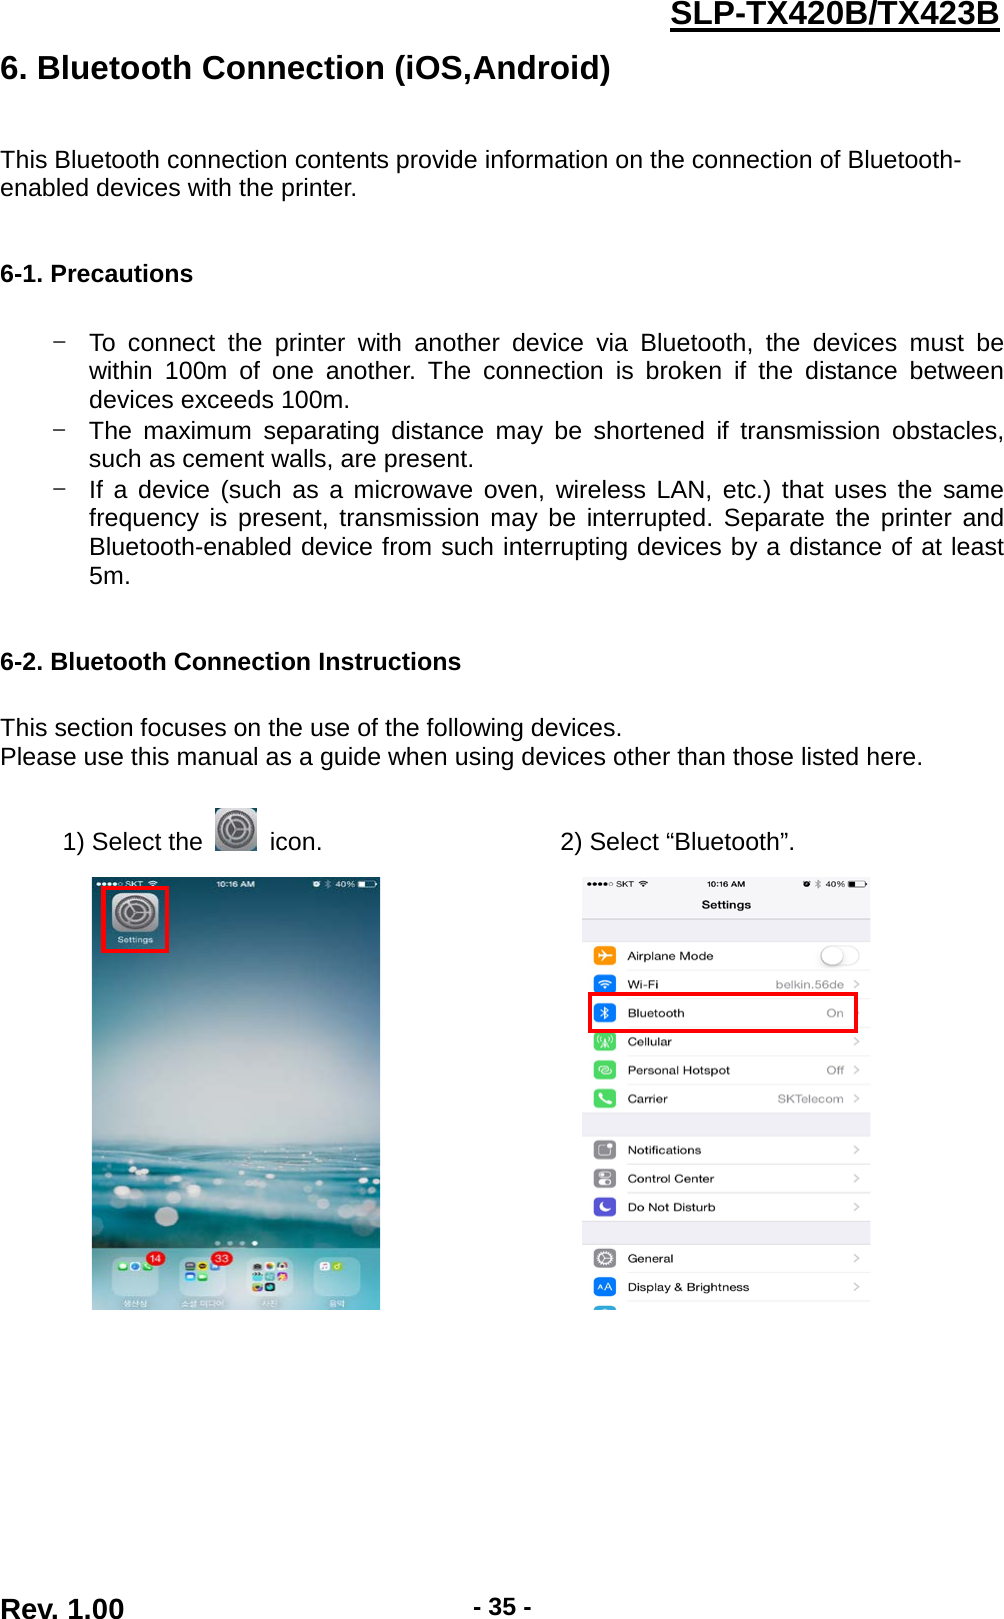  Rev. 1.00 - 35 - SLP-TX420B/TX423B 6. Bluetooth Connection (iOS,Android)   This Bluetooth connection contents provide information on the connection of Bluetooth- enabled devices with the printer.   6-1. Precautions  - To connect the printer with another device via Bluetooth, the devices must be within 100m of one another. The connection is broken if the distance between devices exceeds 100m. - The maximum separating distance may be shortened if transmission obstacles, such as cement walls, are present. - If a device (such as a microwave oven, wireless LAN, etc.) that uses the same frequency is present, transmission may be interrupted. Separate the printer and Bluetooth-enabled device from such interrupting devices by a distance of at least 5m.   6-2. Bluetooth Connection Instructions  This section focuses on the use of the following devices. Please use this manual as a guide when using devices other than those listed here.  1) Select the   icon.                   2) Select “Bluetooth”.                          